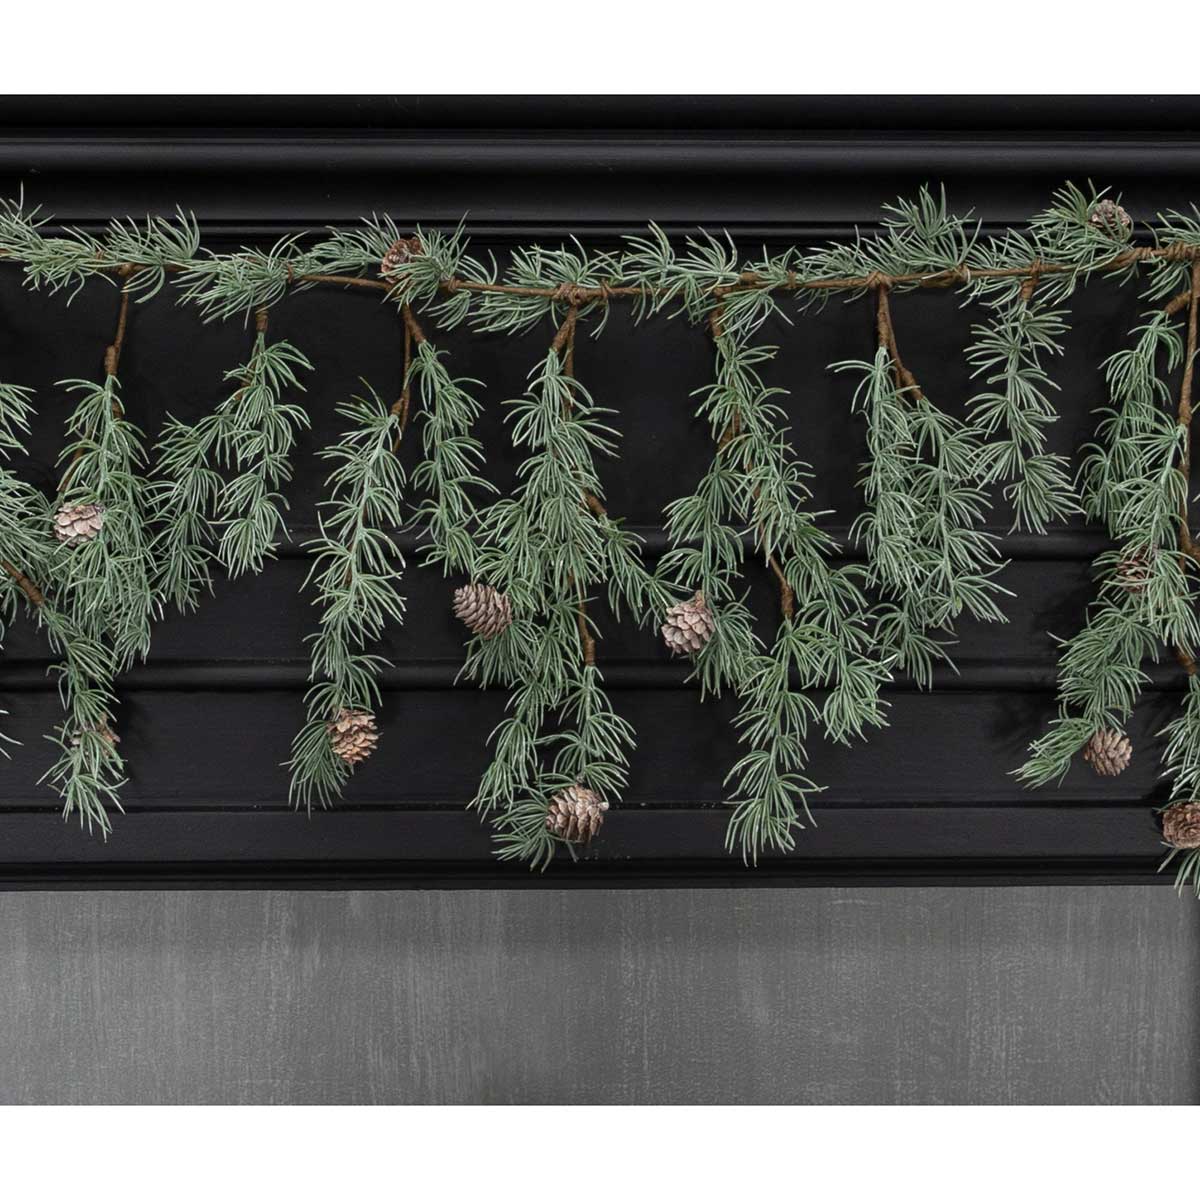 WEEPING PINE GARLAND WITH PINECONES 68"X16"